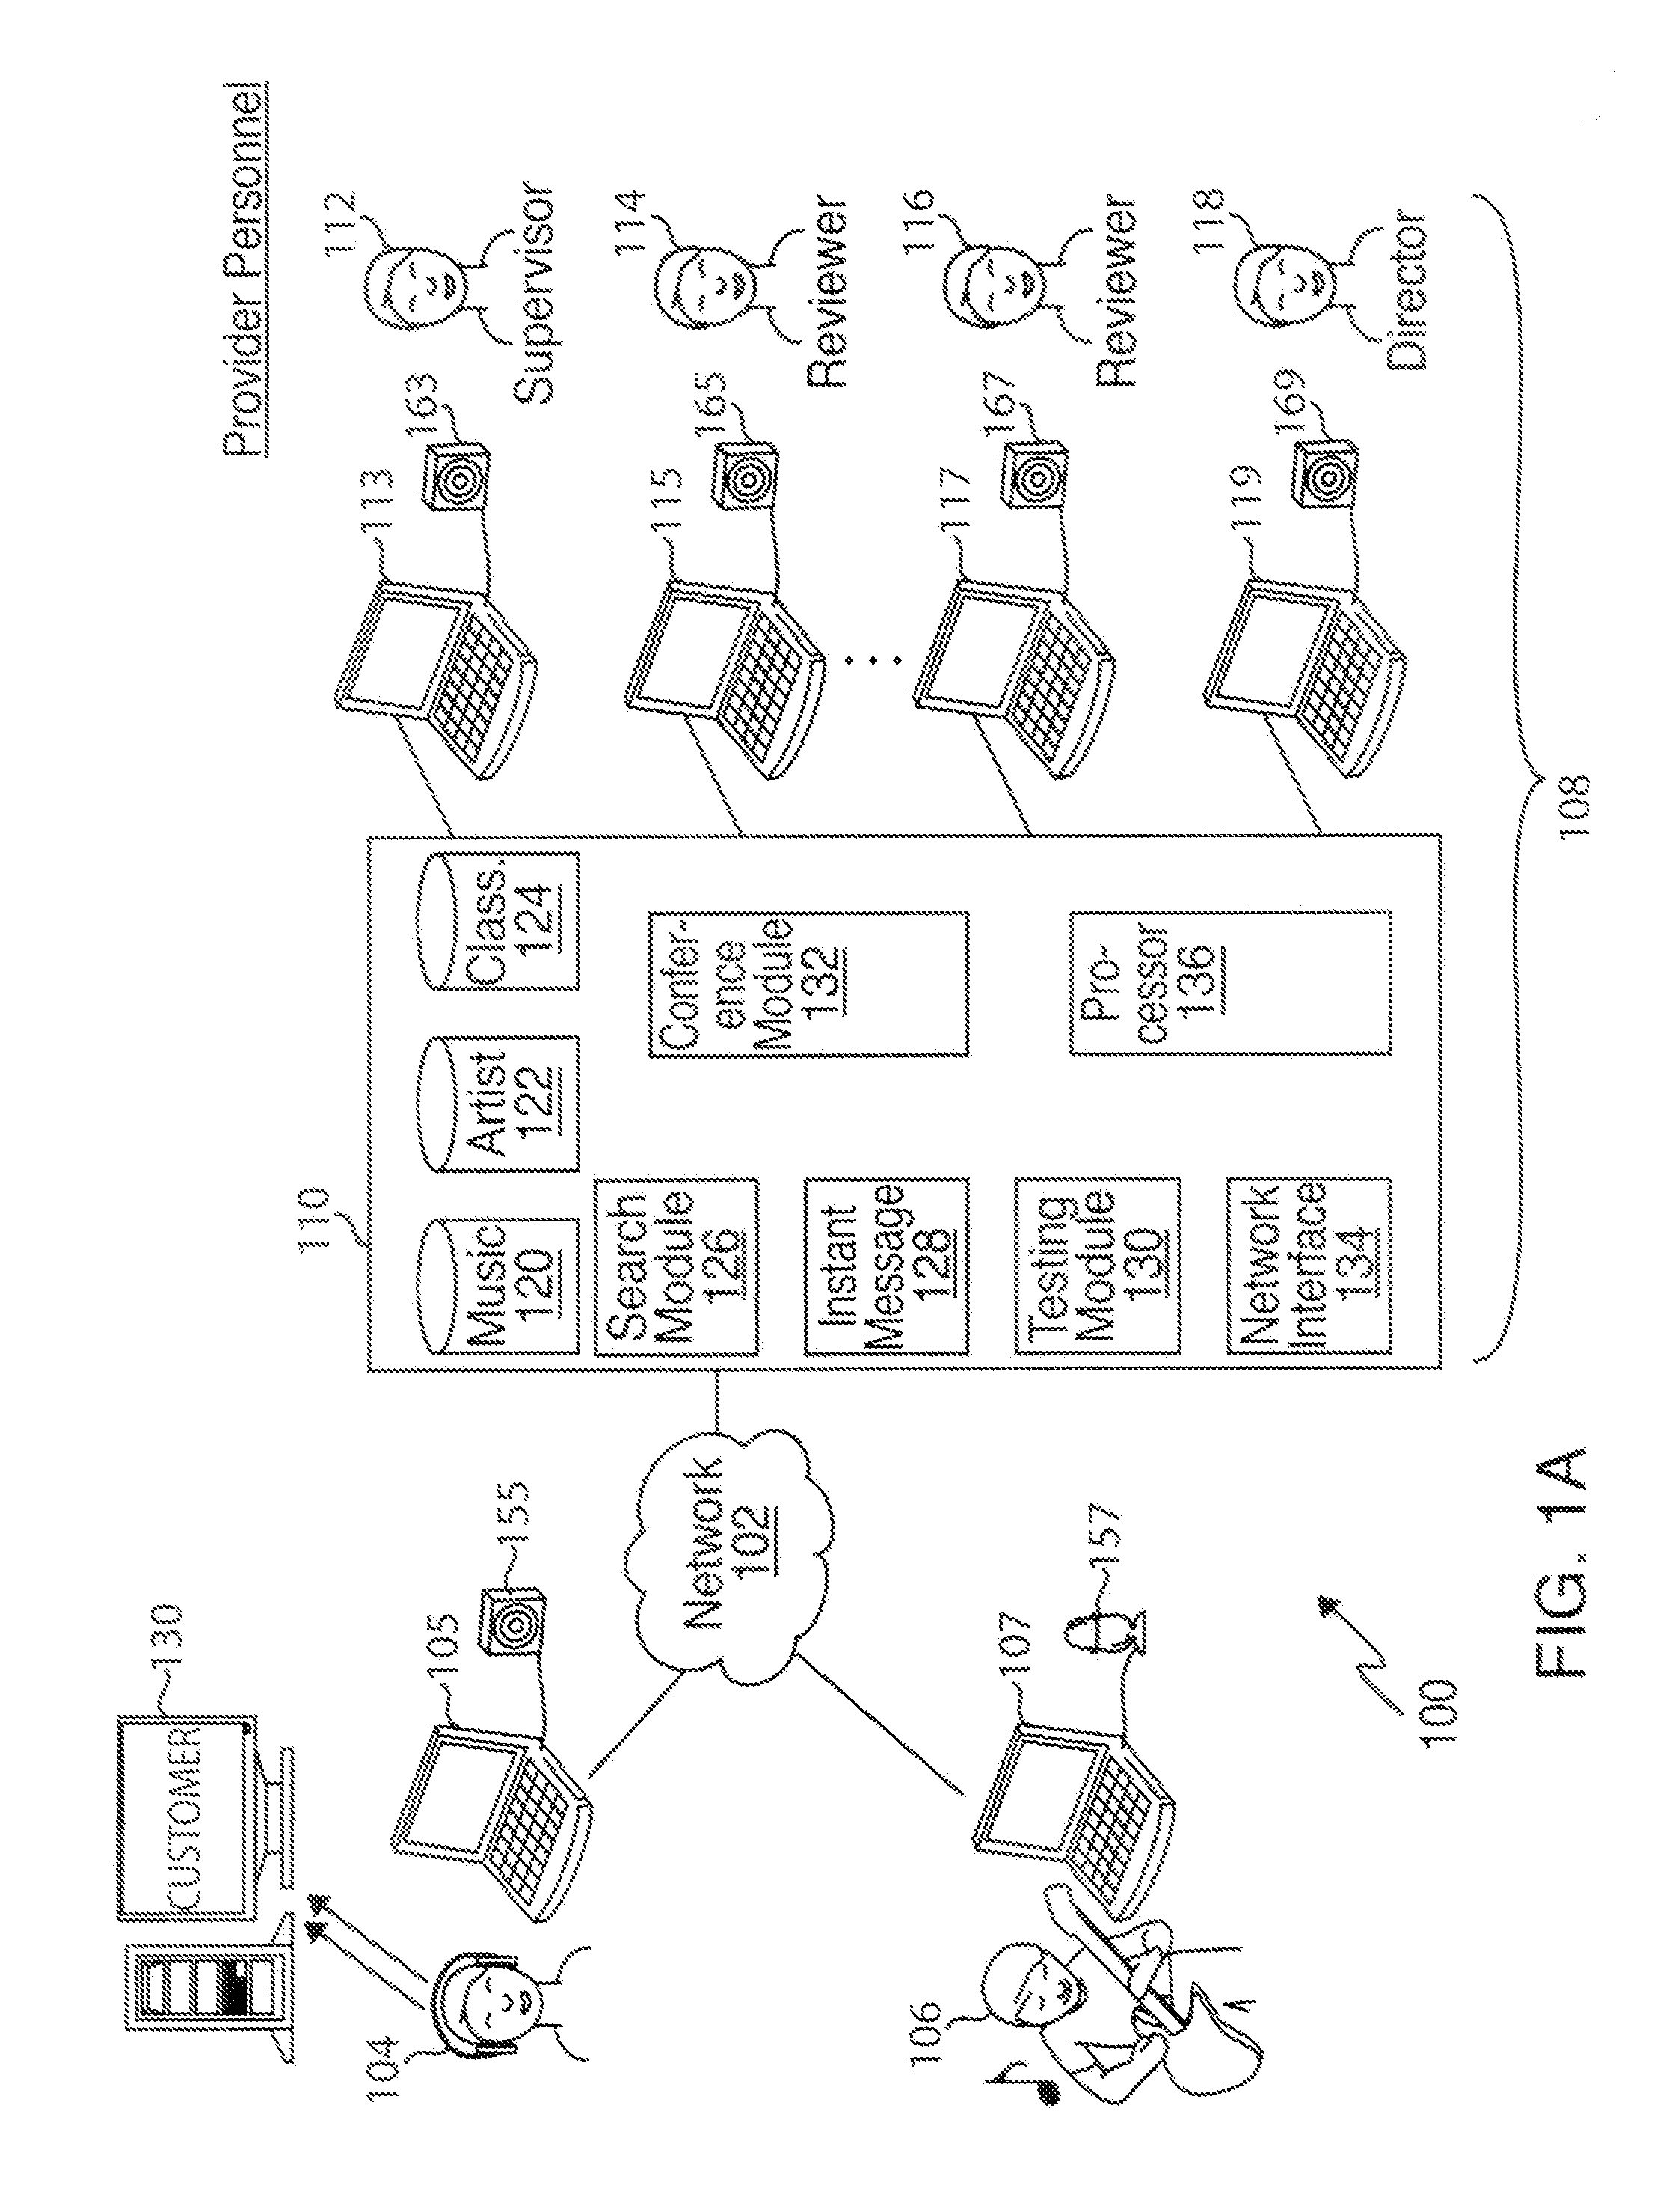 Method and System for Gathering and Pseudo-Objectively Classifying Copyrightable Material to be Licensed Through a Provider Network